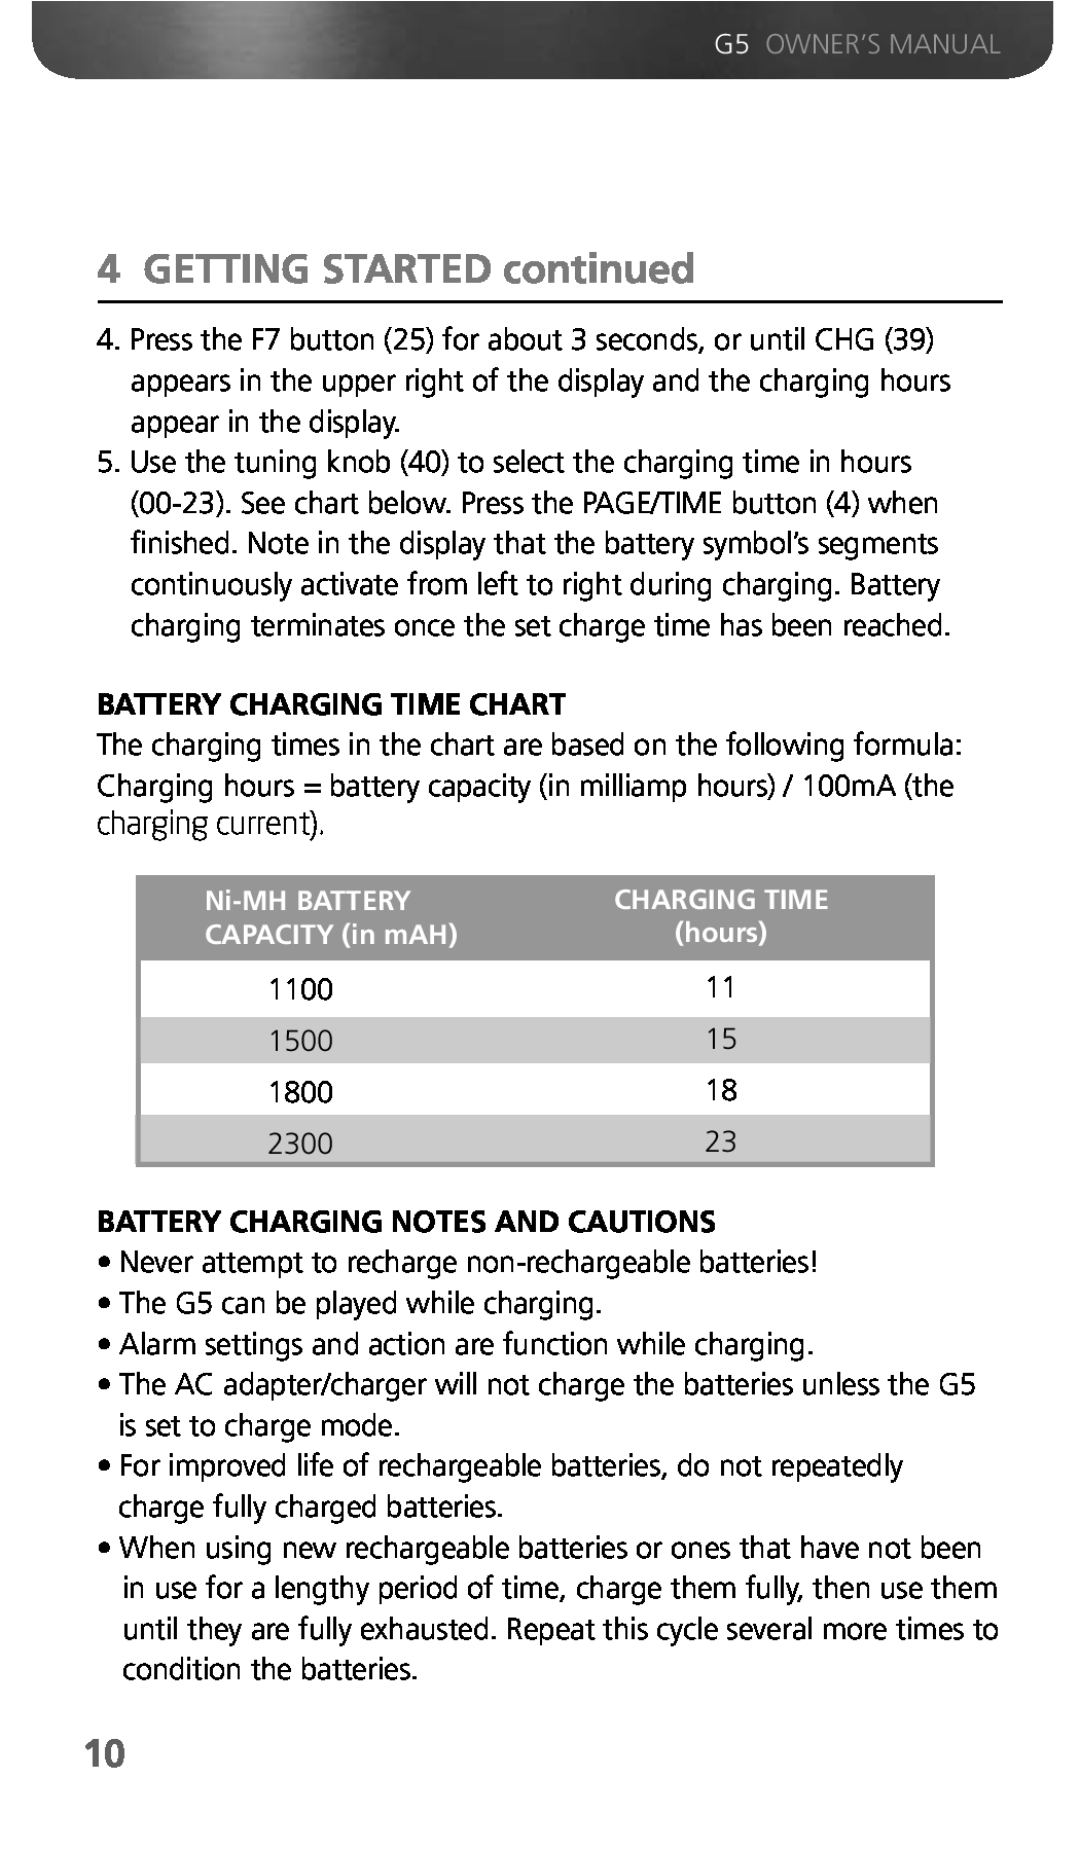 Eton G5 owner manual GETTING STARTED continued, Battery Charging Time Chart, Ni-MH BATTERY, CAPACITY in mAH 